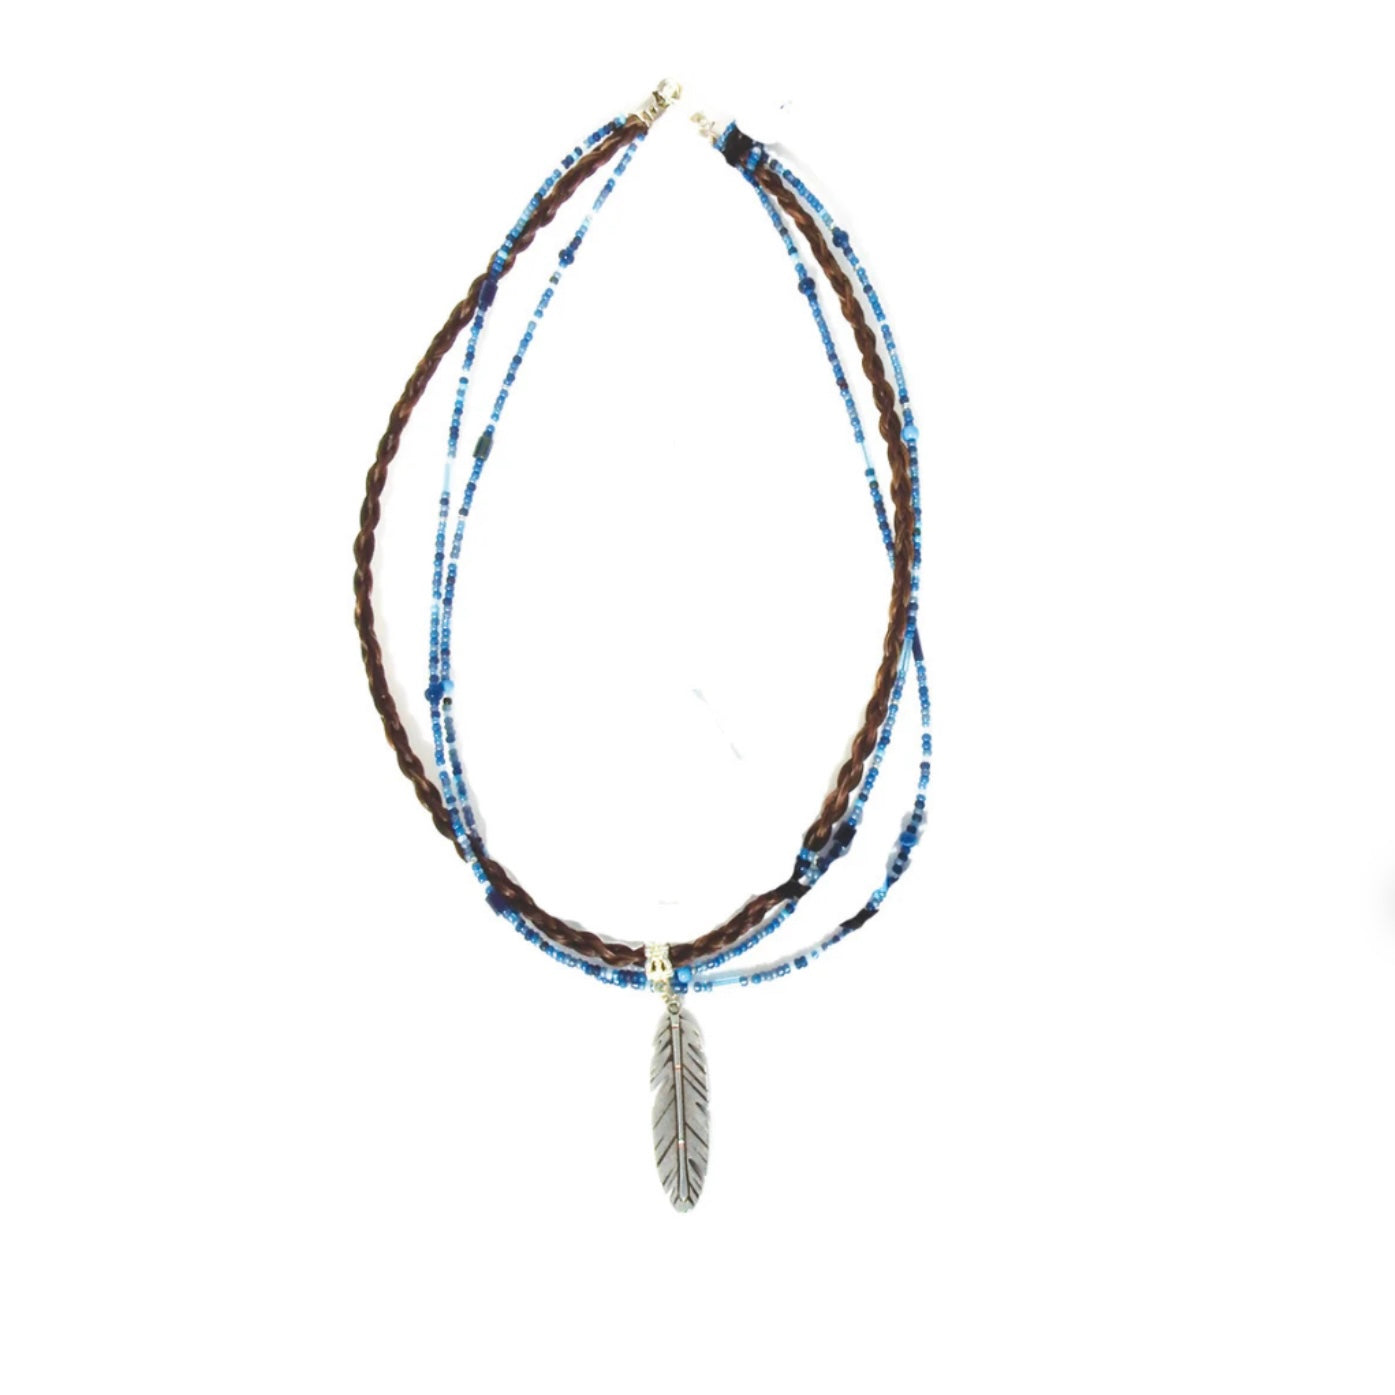 HANDCRAFTED GENUINE BRAIDED HORSEHAIR WITH SHIMMERING BLUE/SILVER BEADS & SILVER FEATHER PENDANT